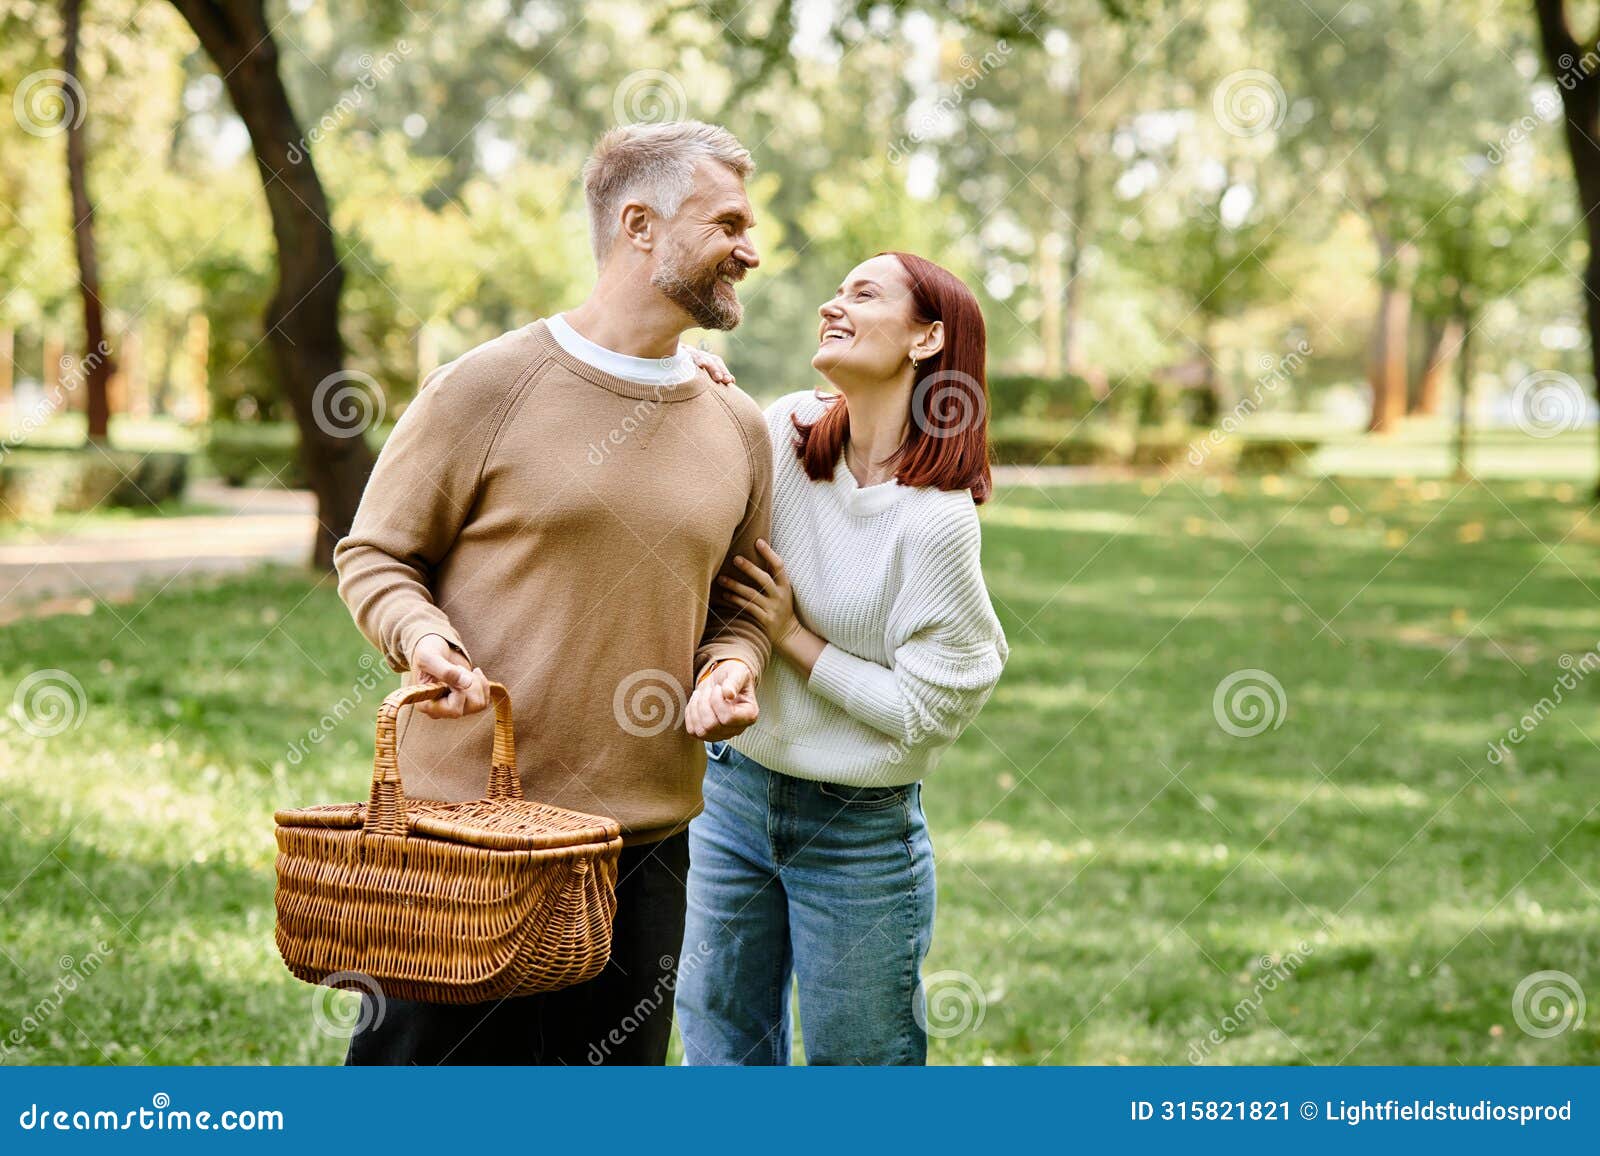 a couple, casually dressed, leisurely walk